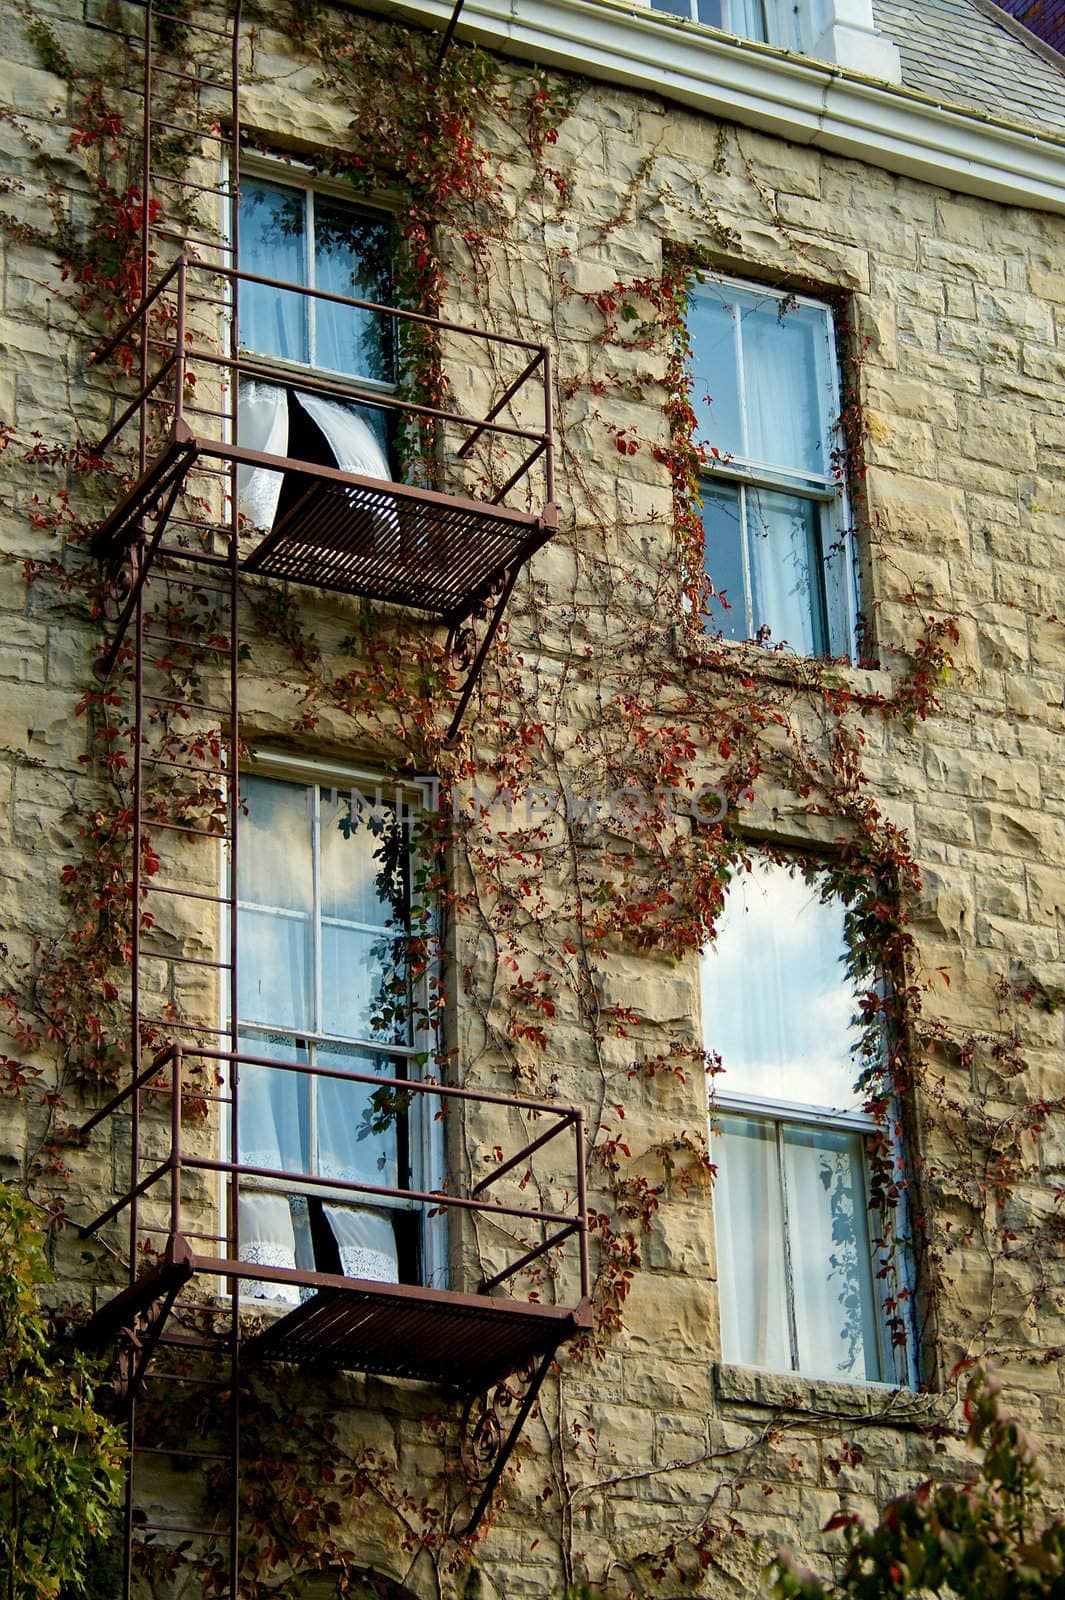 A rust colored fire escape over windows with billowing curtains, in a style resembling an oil painting.